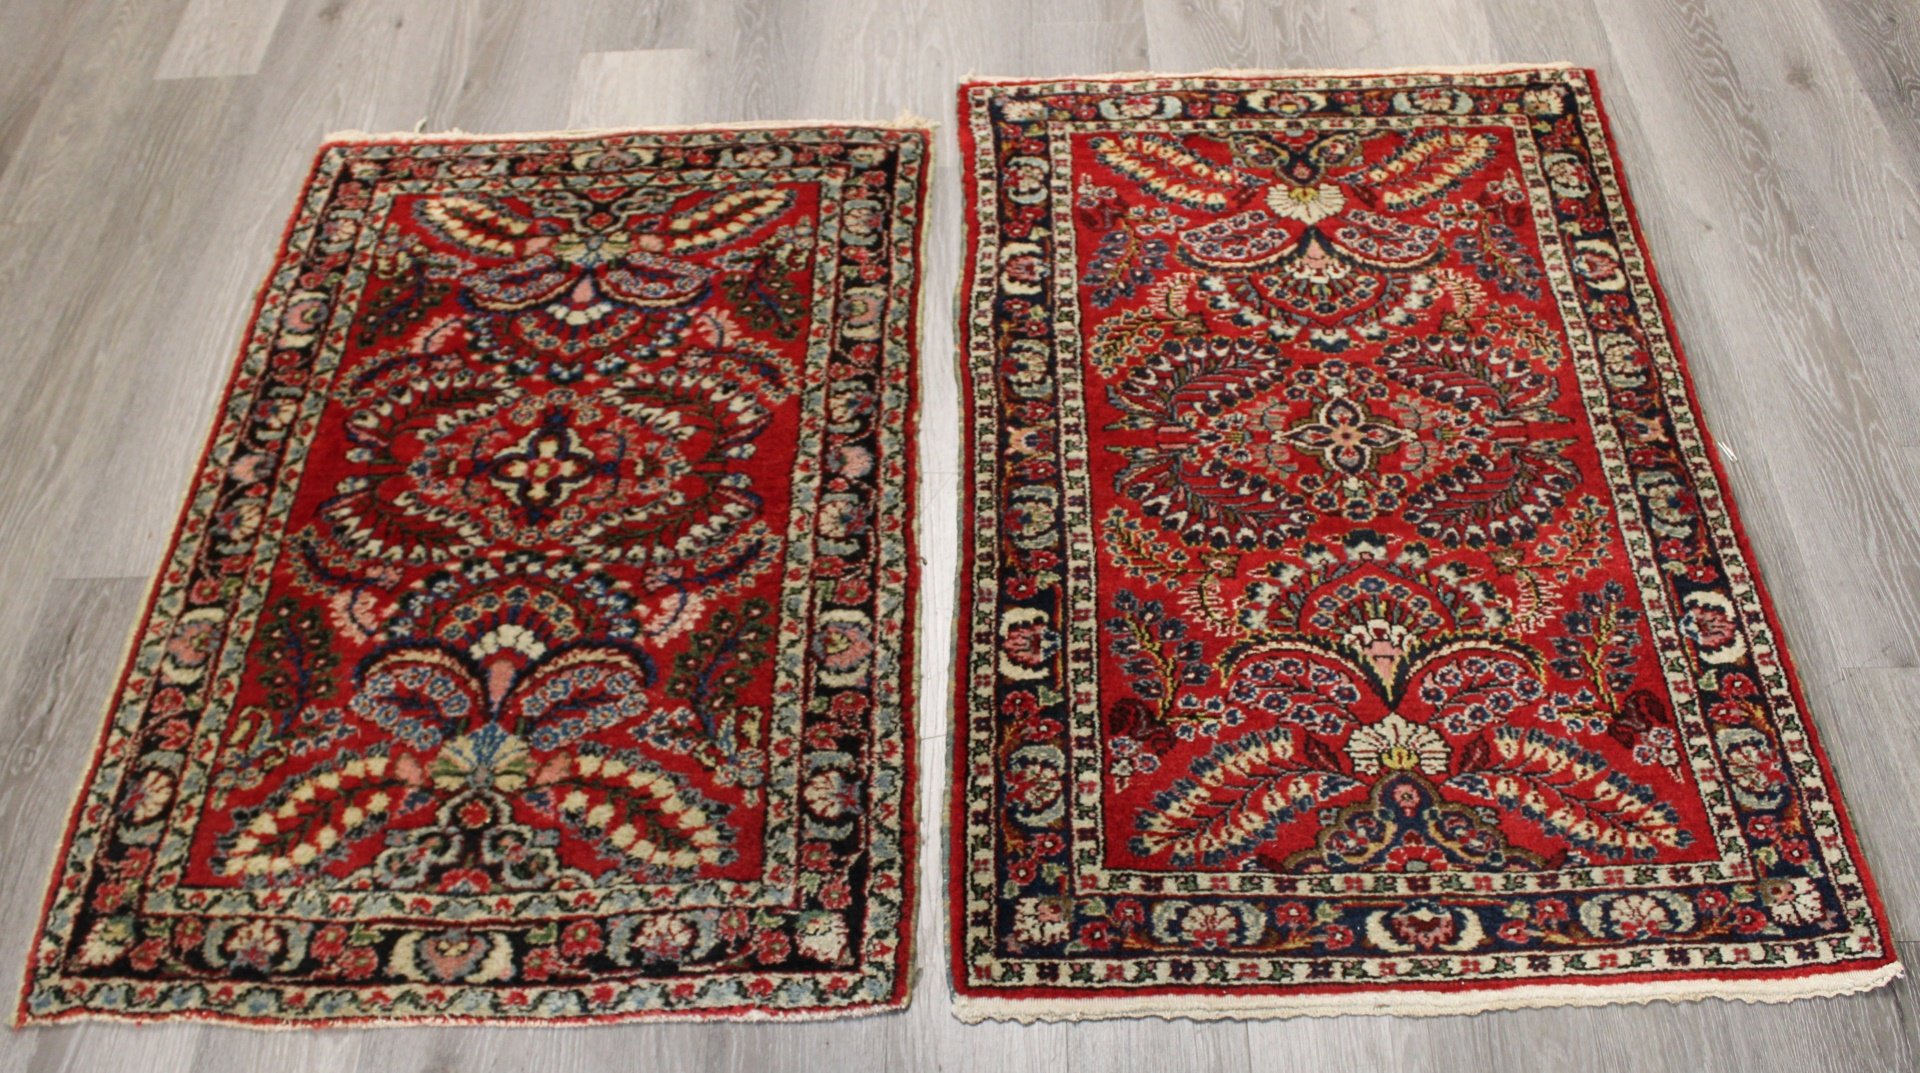 2 ANTIQUE AND FINELY HAND WOVEN 3bac38